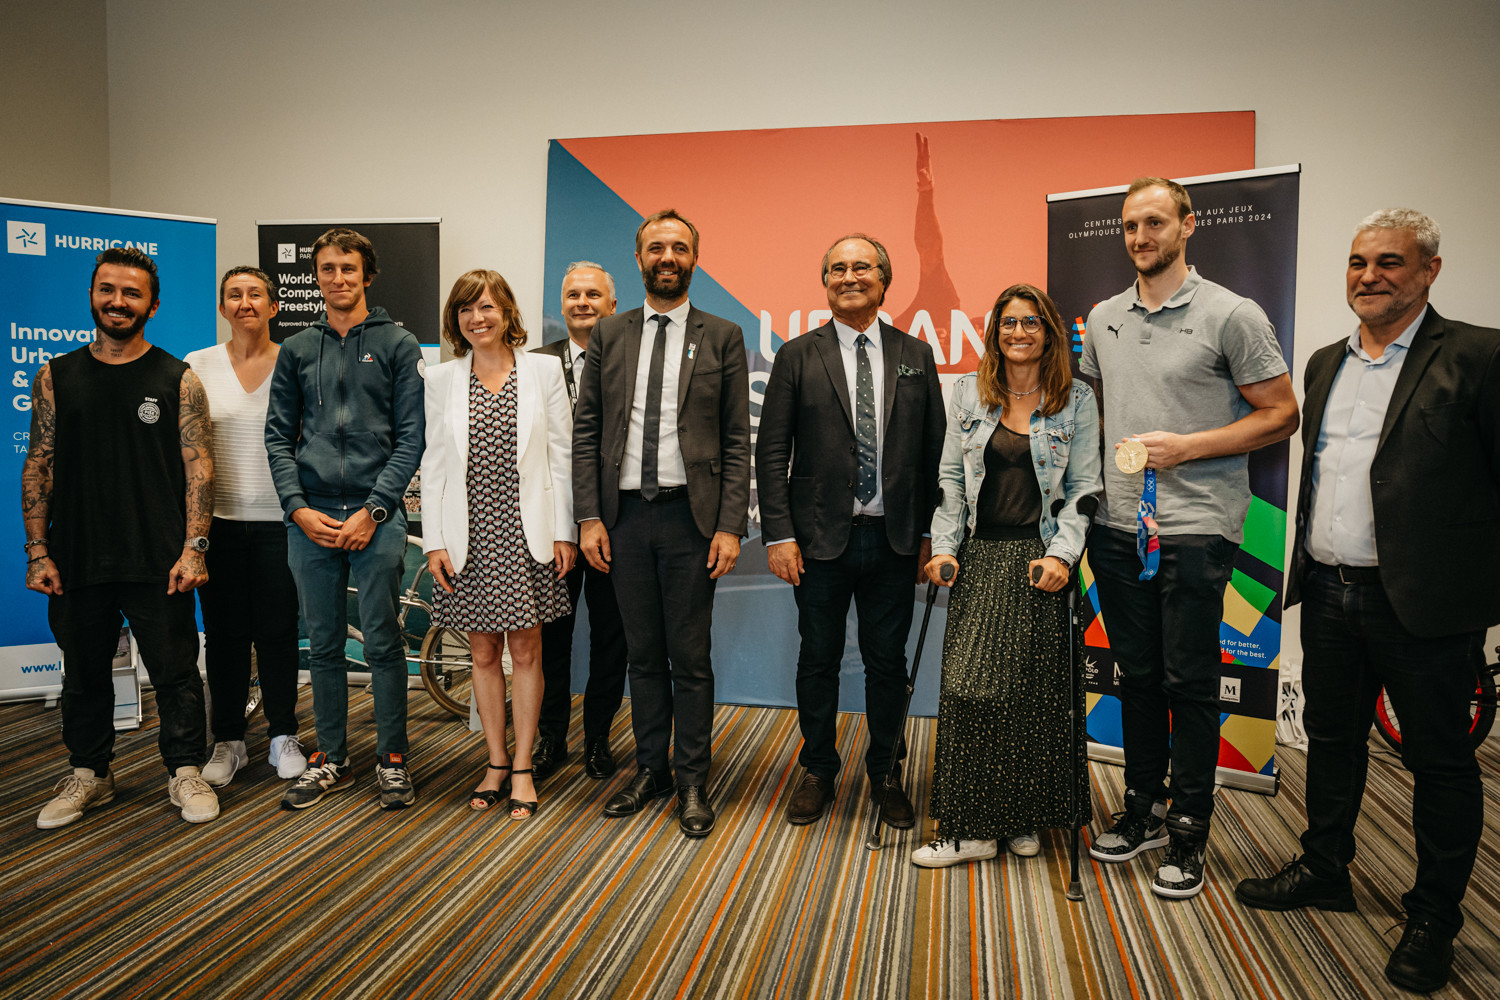 Montpellier, Sète, and Millau launched a campaign to be Paris 2024 preparation centres at the Urban Sports Summit in Montpellier ©Hurricane - FISE